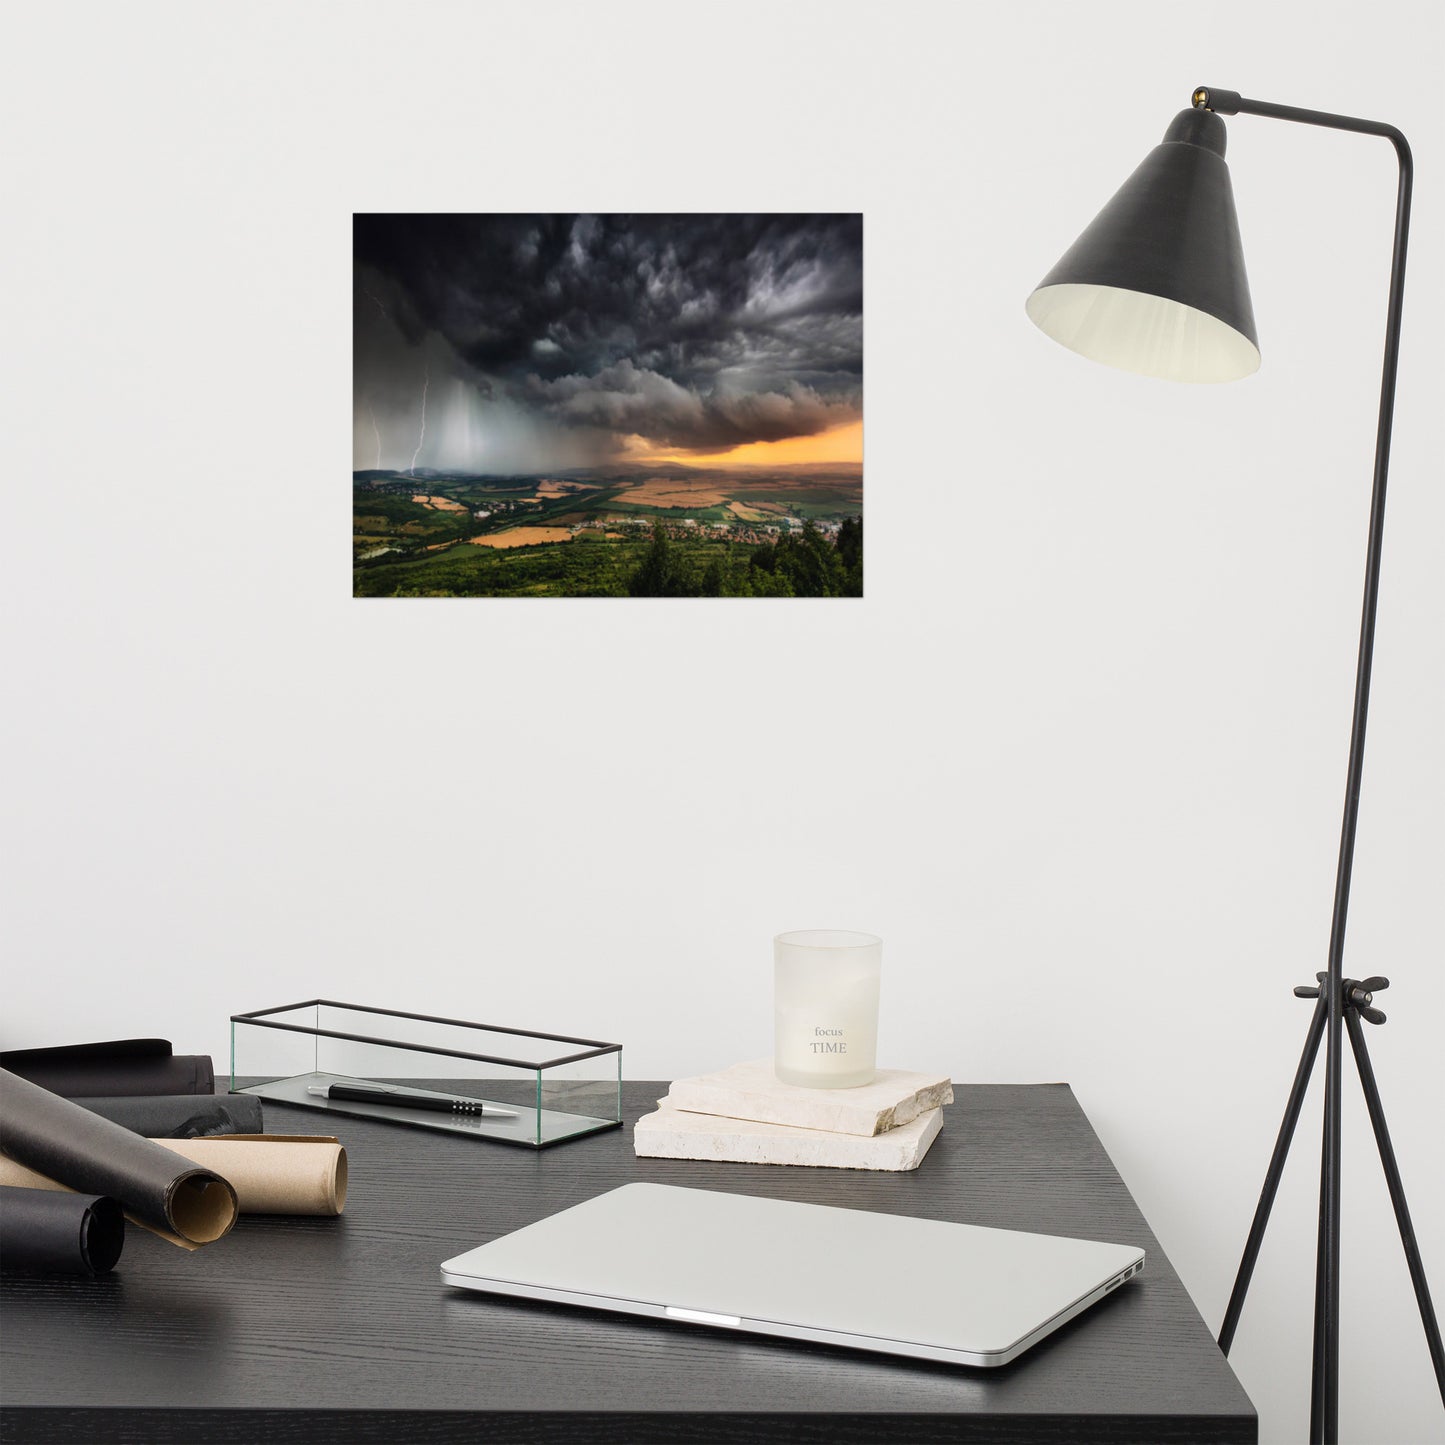 The Storm Rustic Landscape Photograph Loose Unframed Wall Art Print